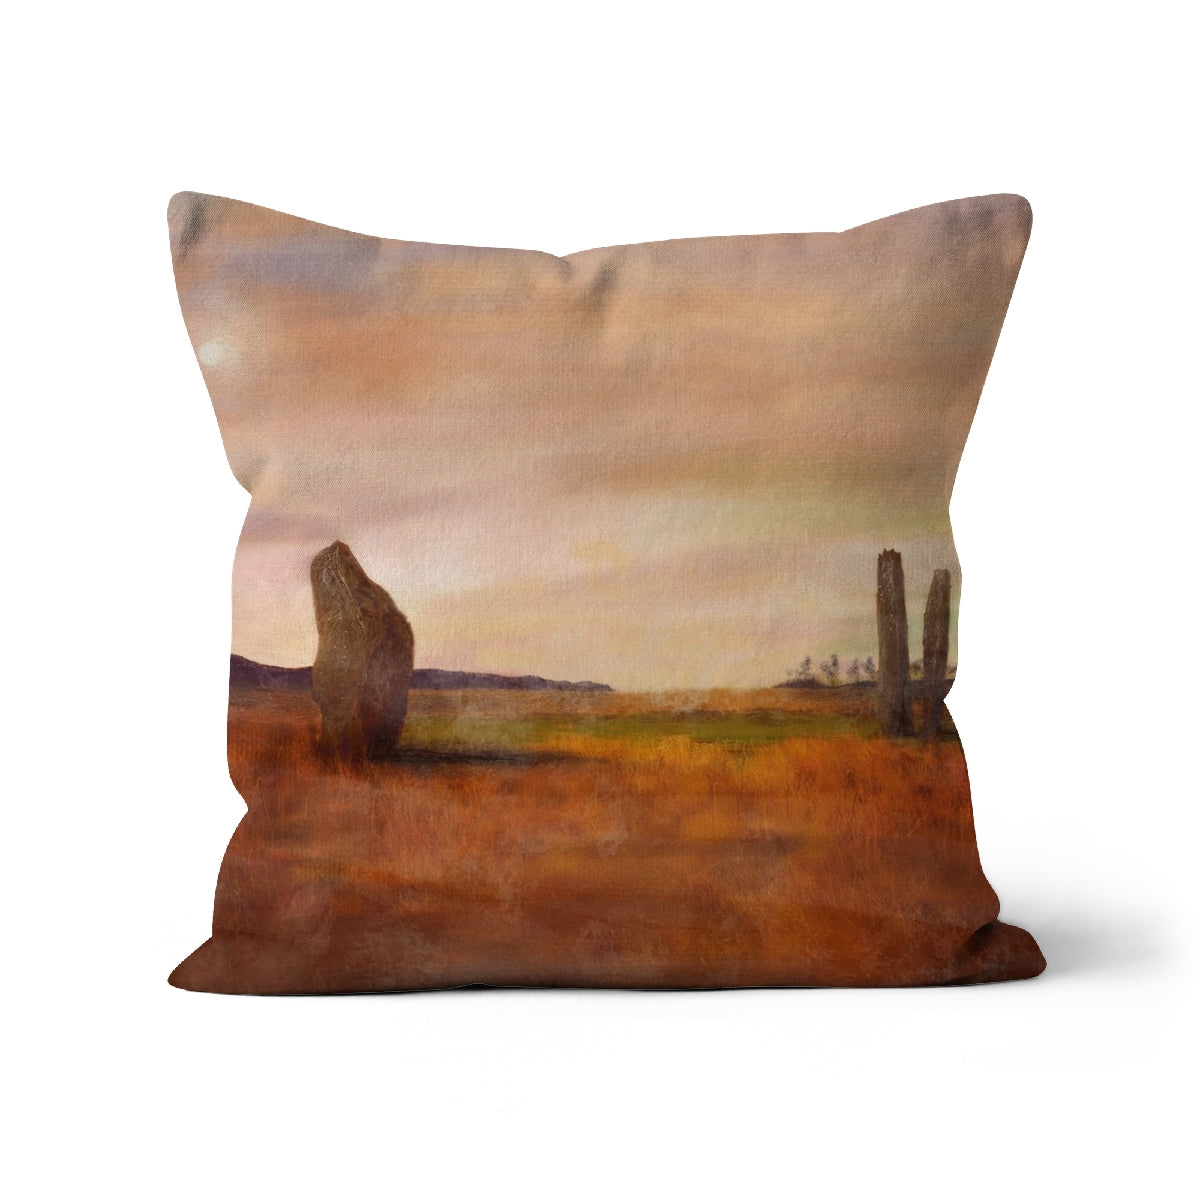 Machrie Moor Arran Art Gifts Cushion-Cushions-Arran Art Gallery-Faux Suede-24"x24"-Paintings, Prints, Homeware, Art Gifts From Scotland By Scottish Artist Kevin Hunter